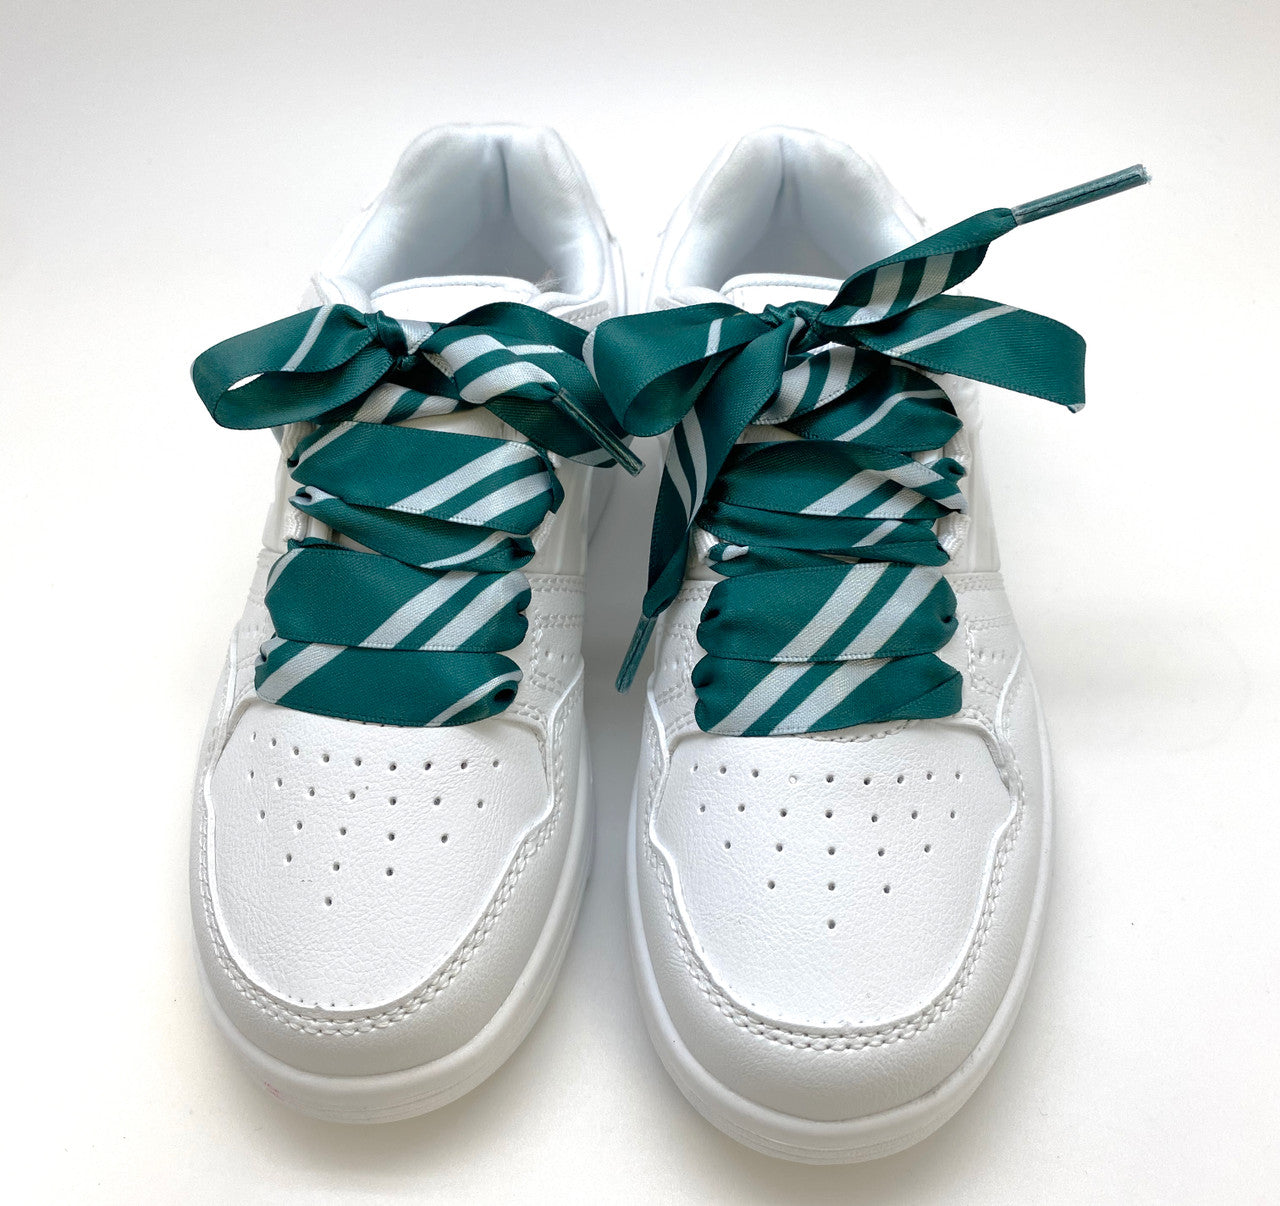 Satin shoelaces tie Hogwarts Slytherin design is perfect for adding some fun and fashion to your sneakers! This is a great shoelace for fun dance shoes, wedding shoes, cheerleading and recitals! All our ribbon shoelaces are printed using dye sublimation technology and can be washed, ironed and re-used! All our laces are designed and printed in the USA